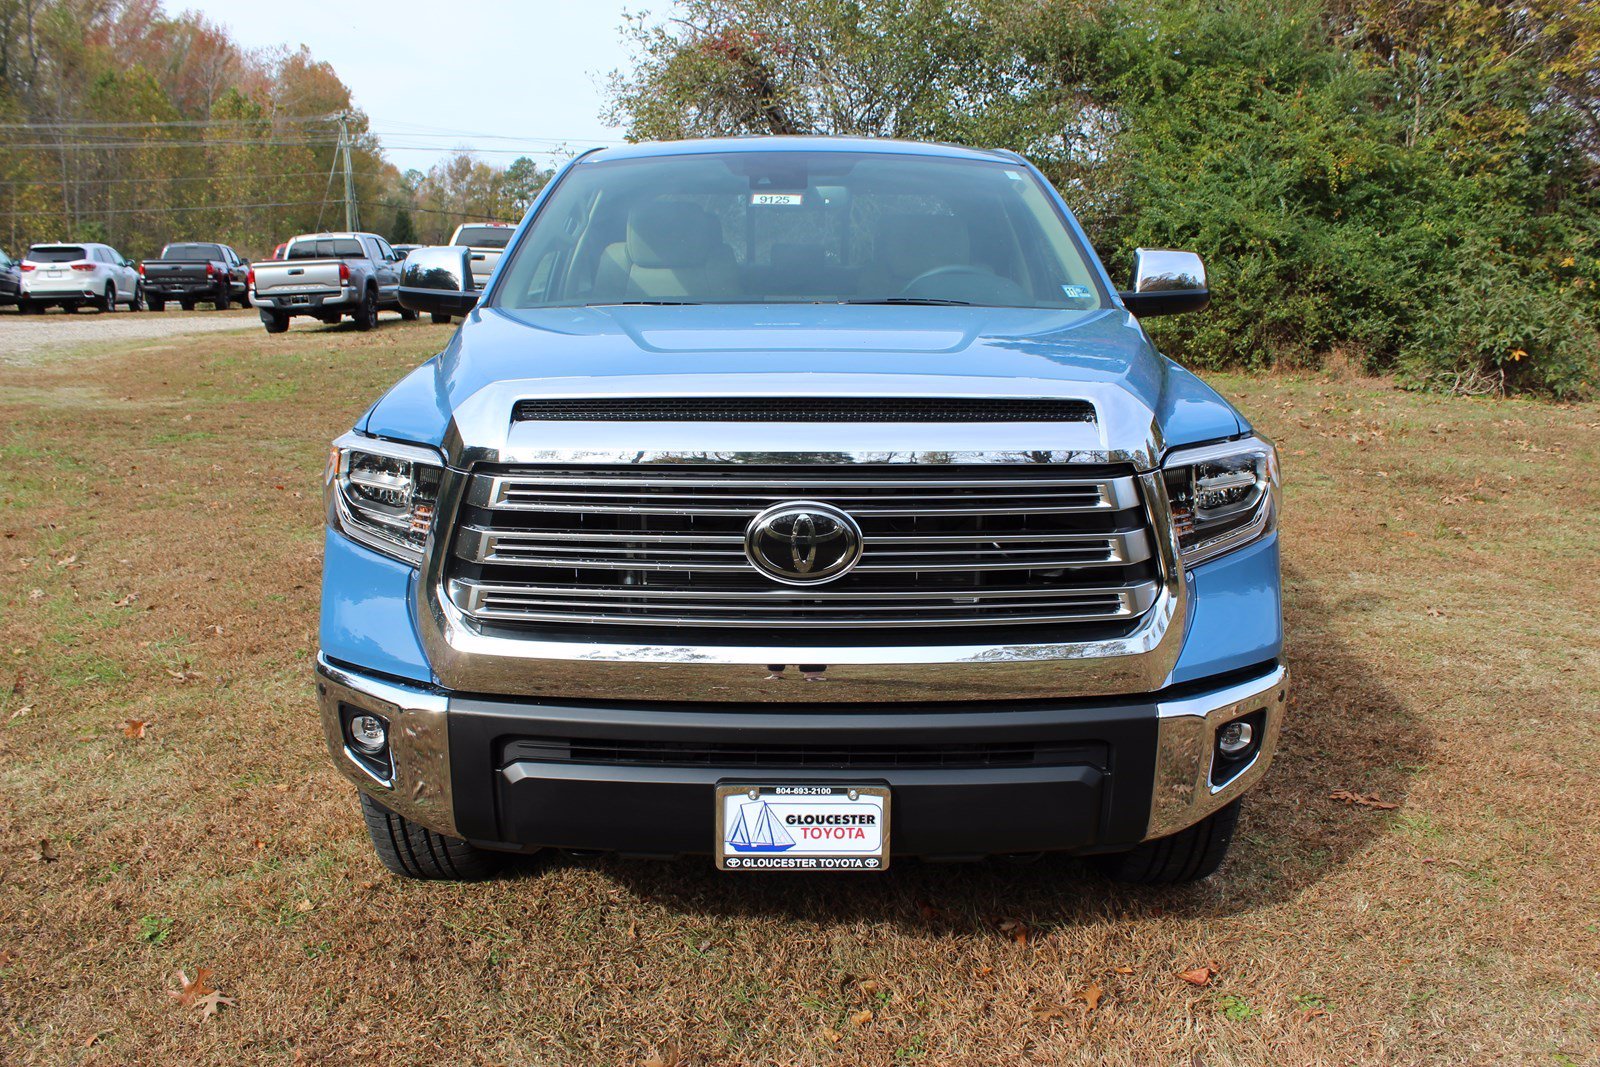 New 2020 Toyota Tundra 4WD Limited Crew Cab Pickup in Gloucester #9125